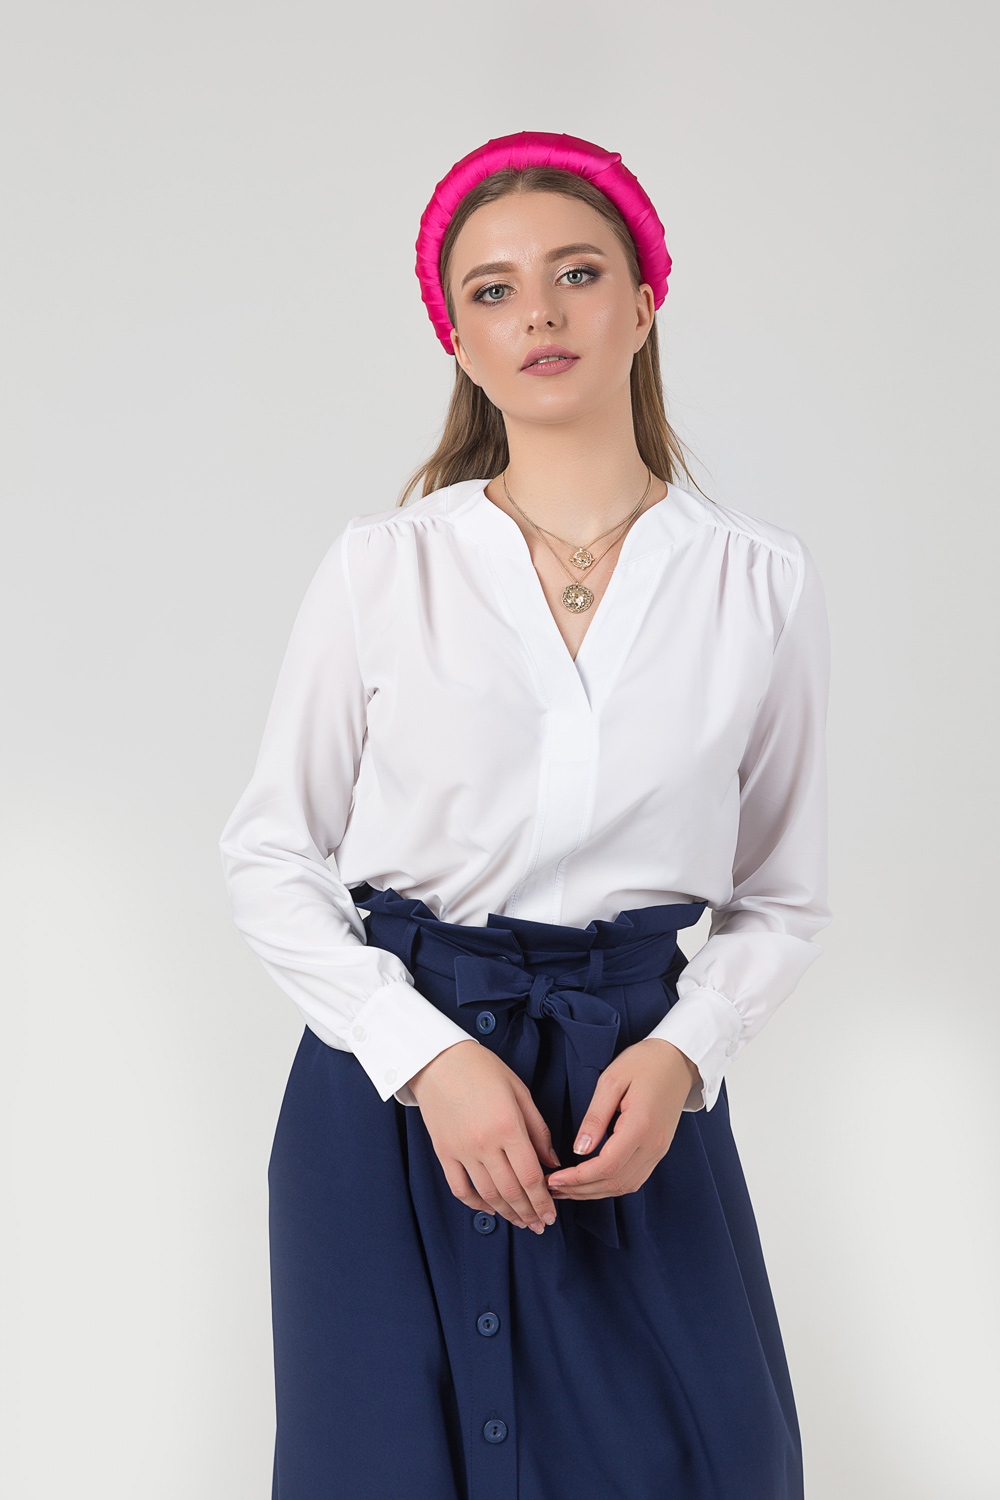 Blouse with a neckline and folds